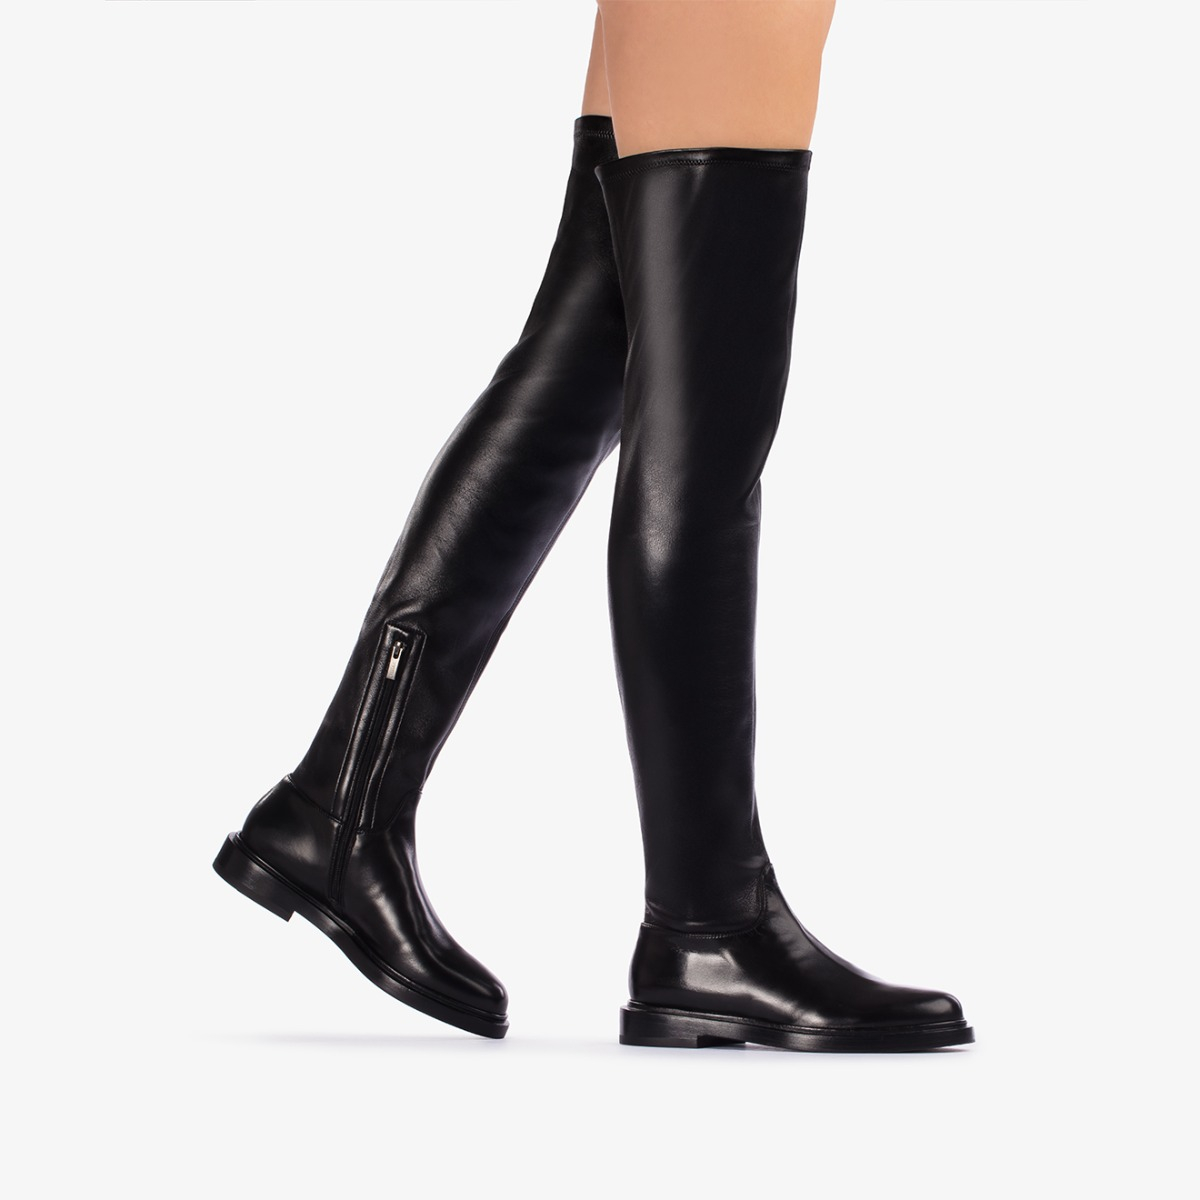 SAMA THIGH-HIGH BOOT - Le Silla official outlet